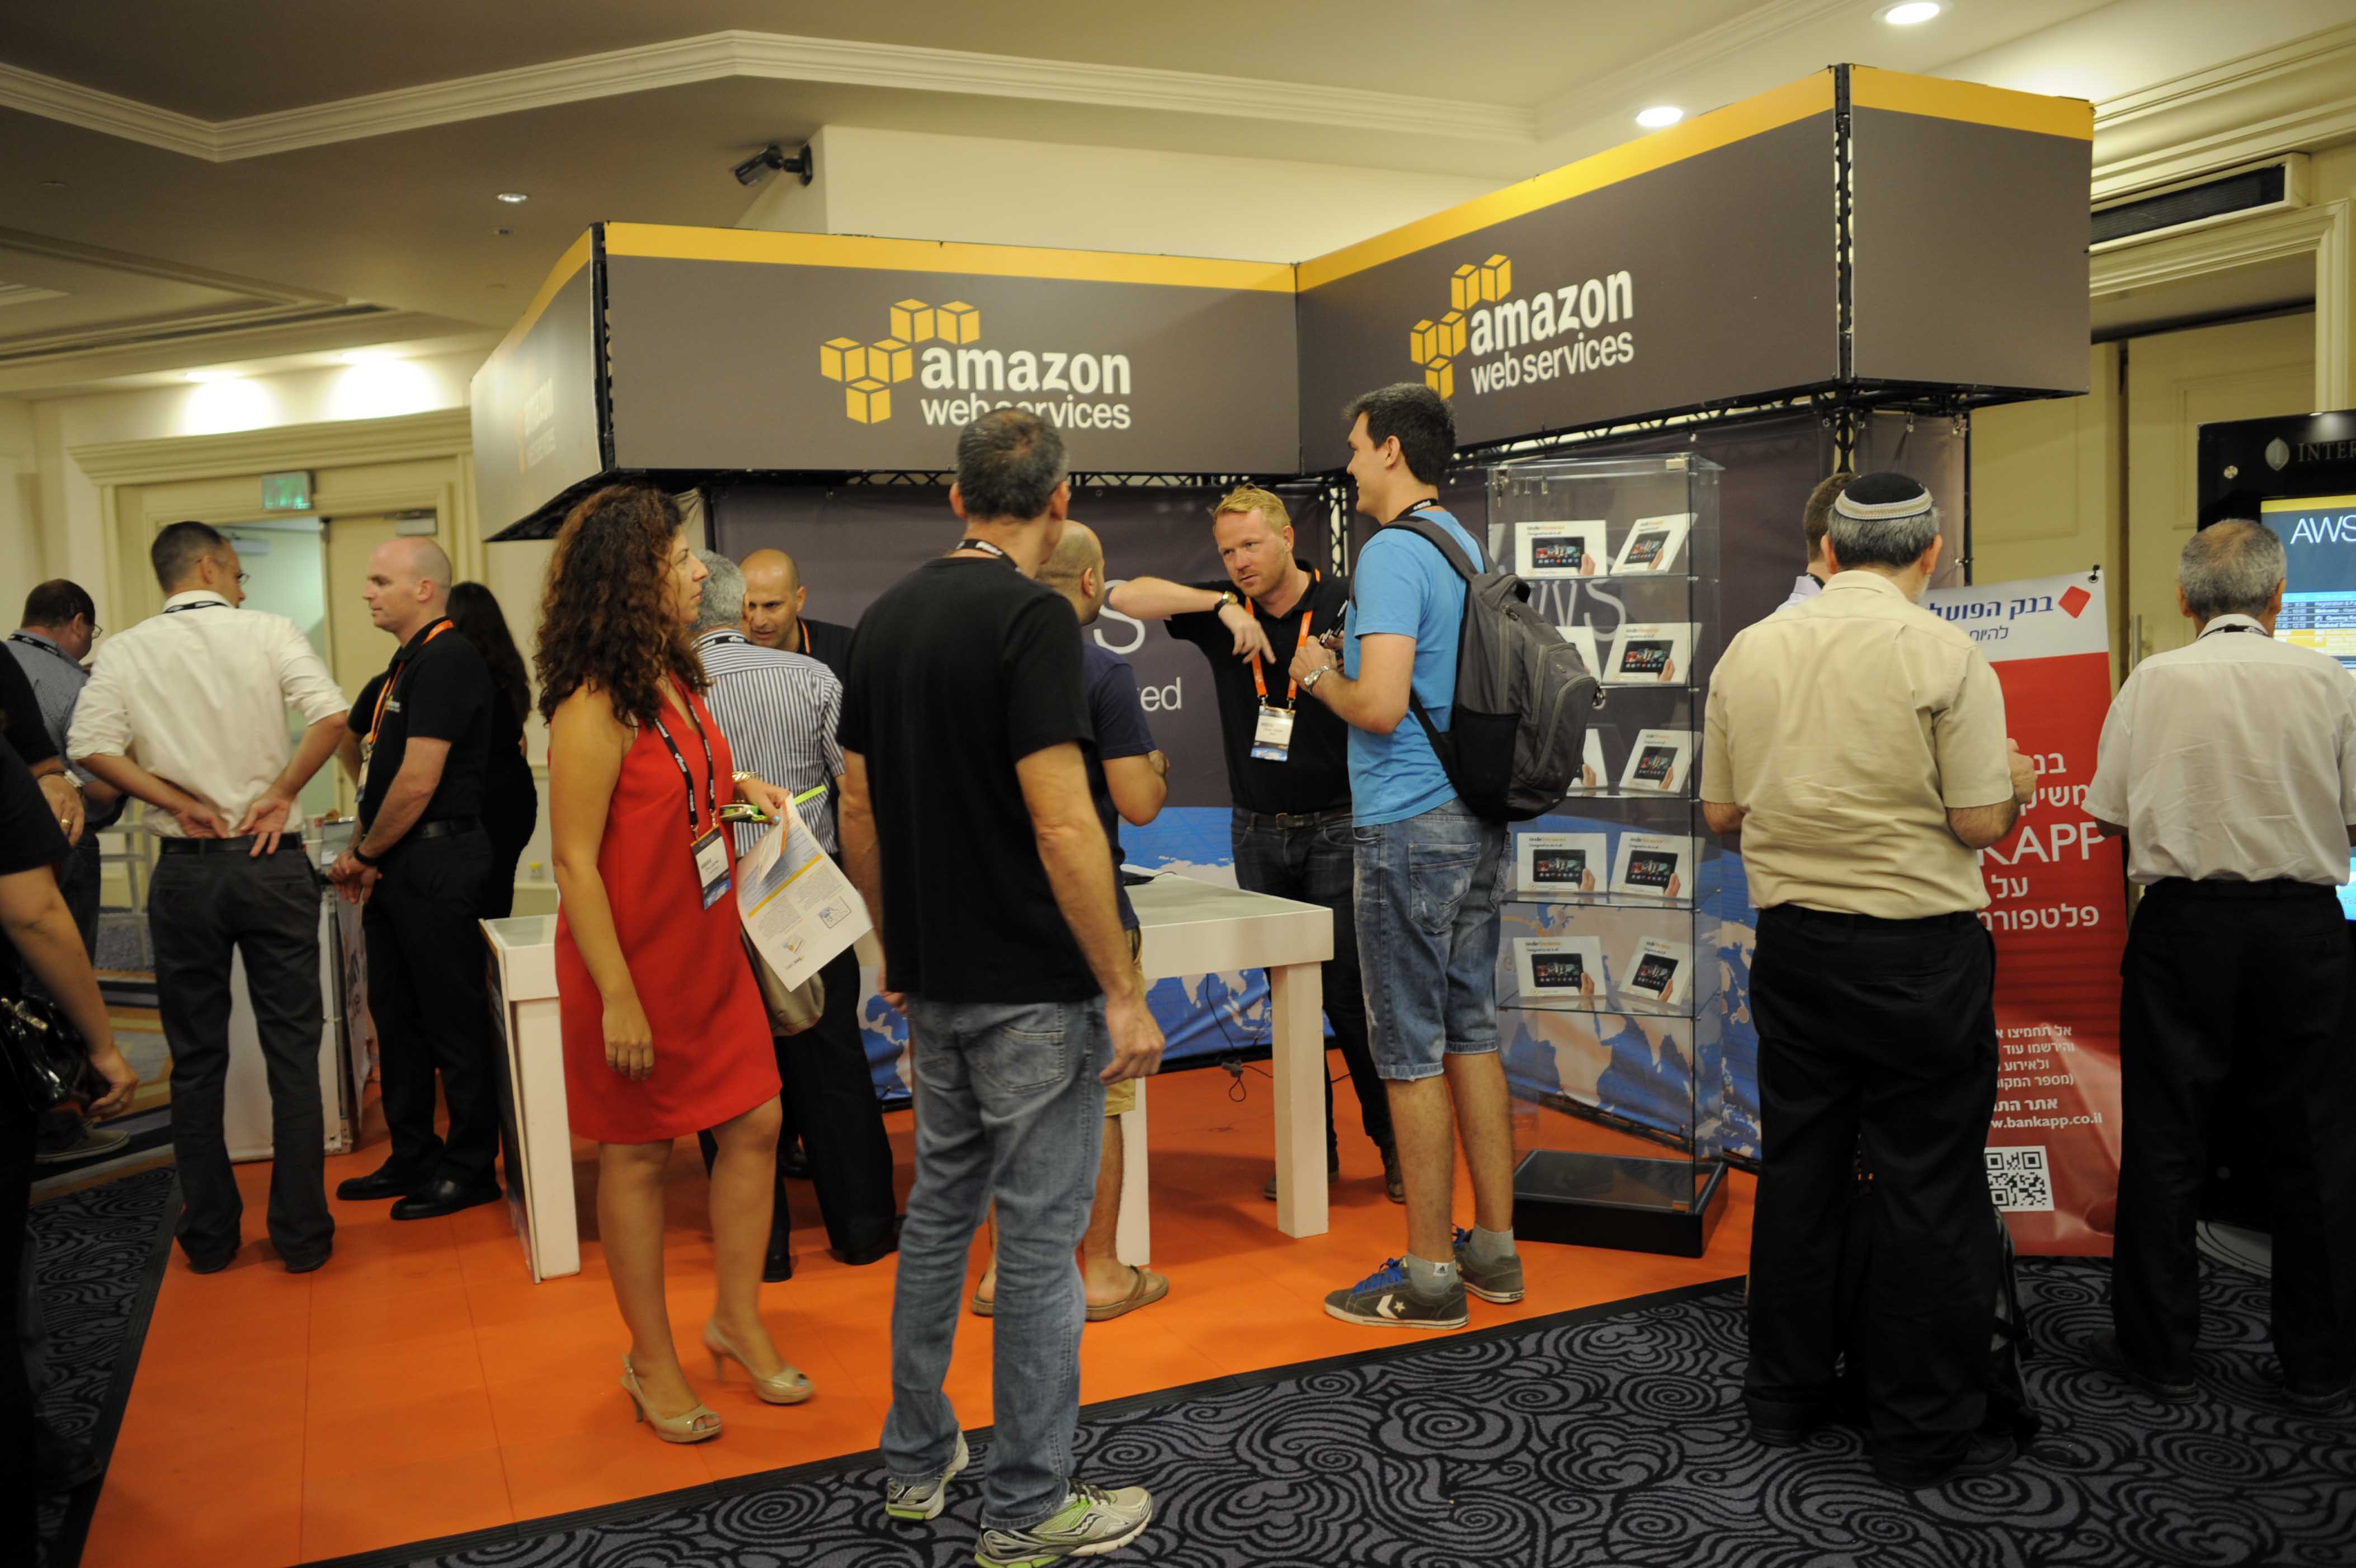 An Amazon Web Services booth at an event.